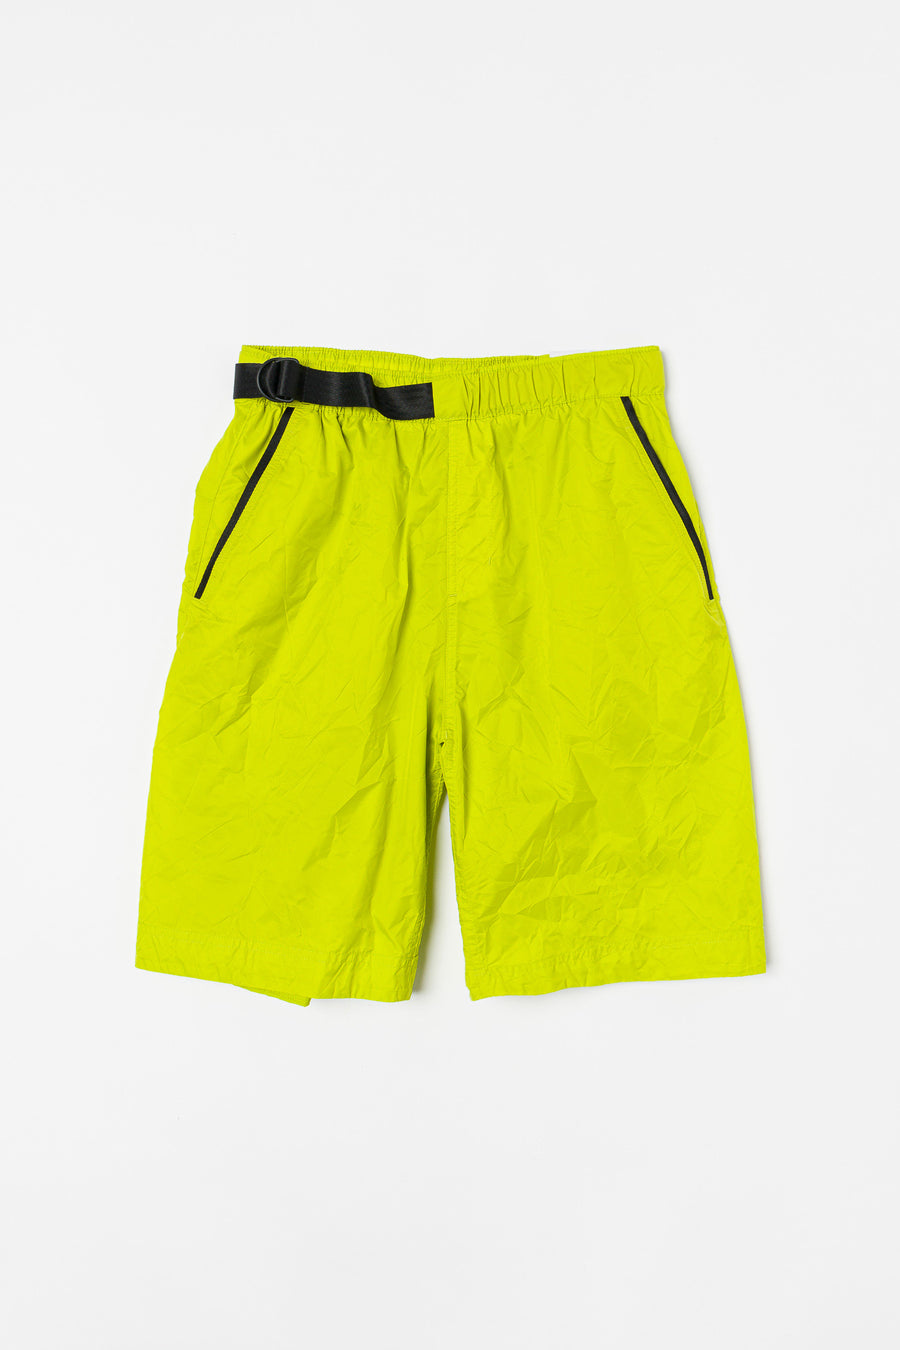 Tech Shorts in Bright Cactus